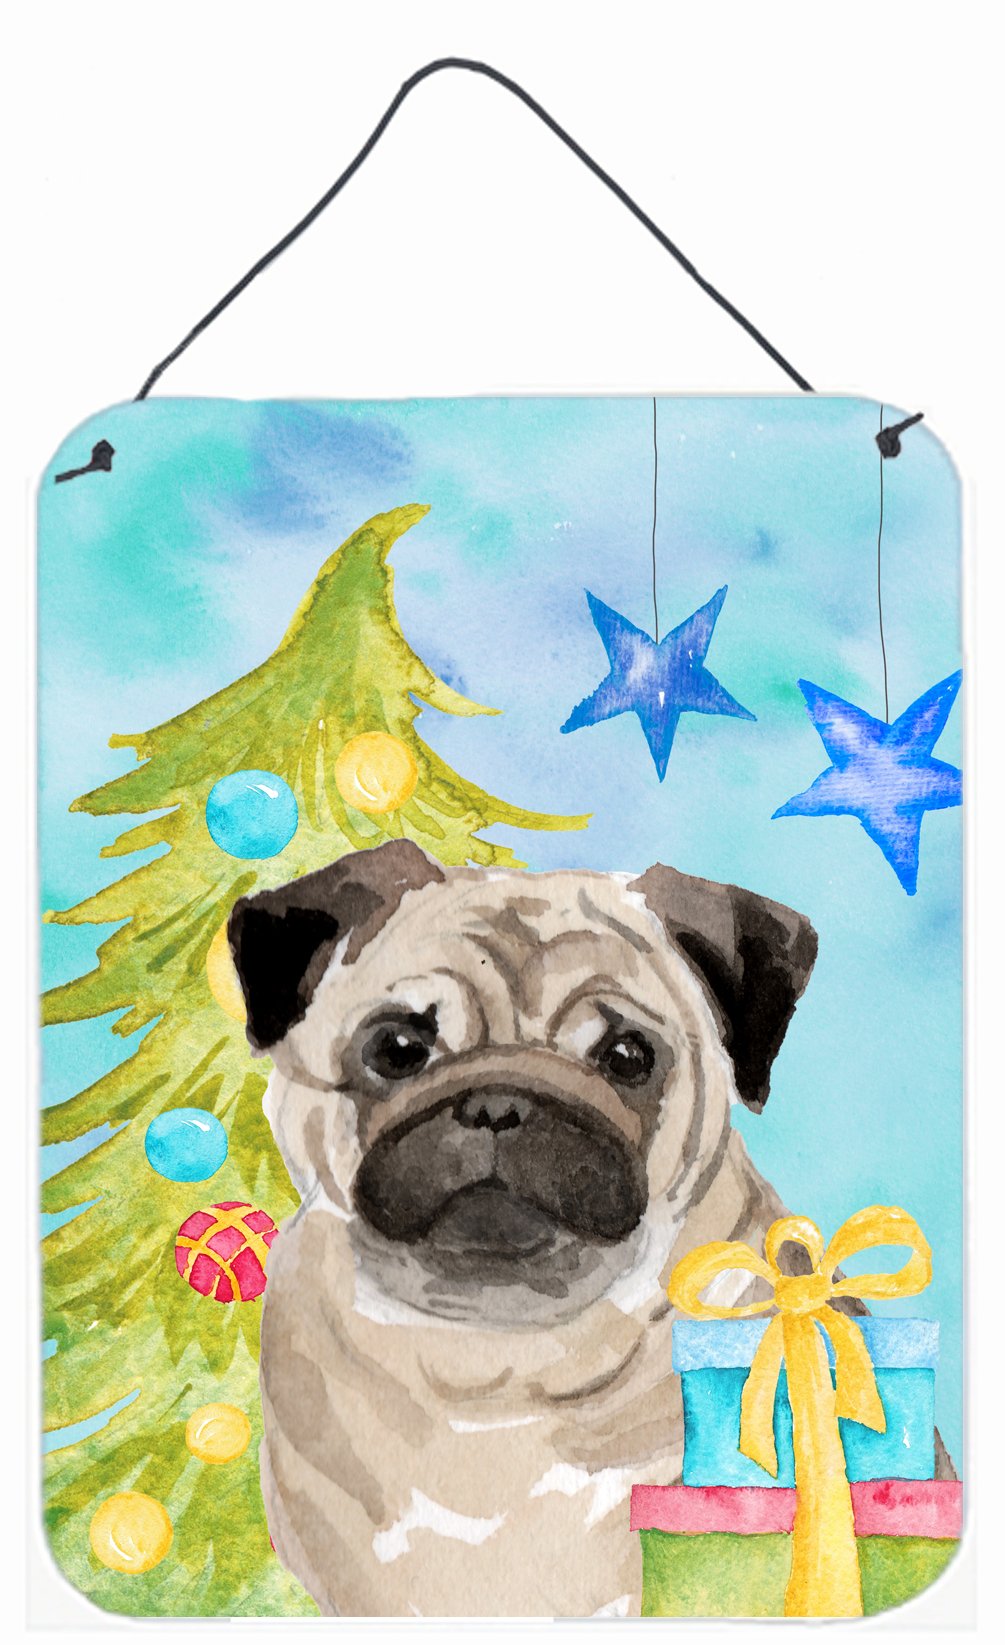 Fawn Pug Christmas Wall or Door Hanging Prints BB9426DS1216 by Caroline's Treasures